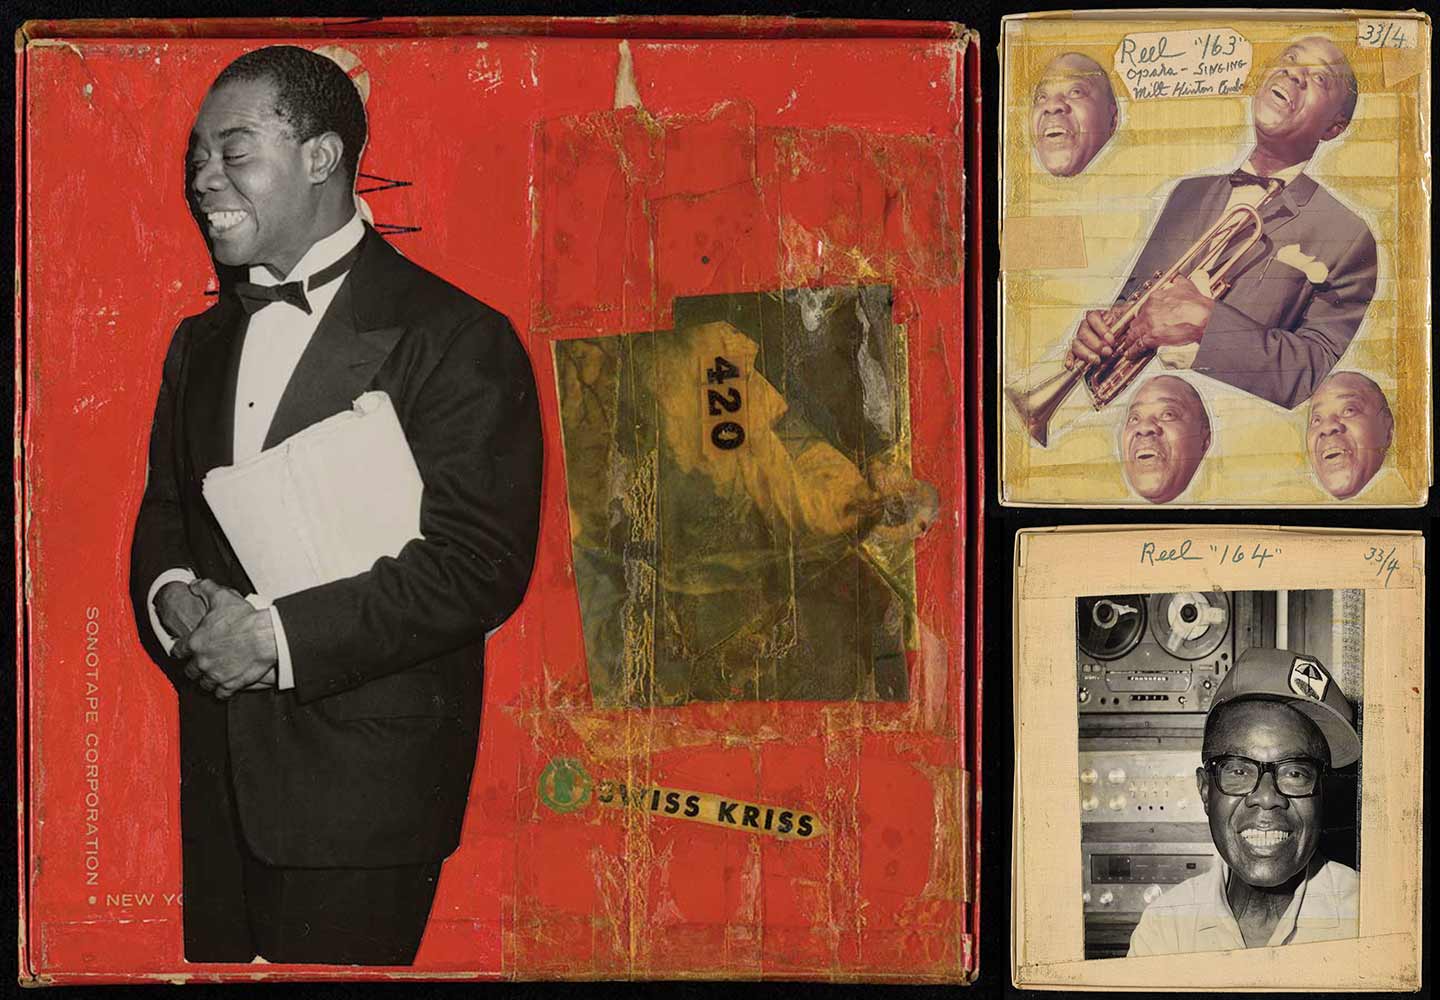 Armstrong made his own collages, cut from photos and magazine pages, as covers for his tape recordings.